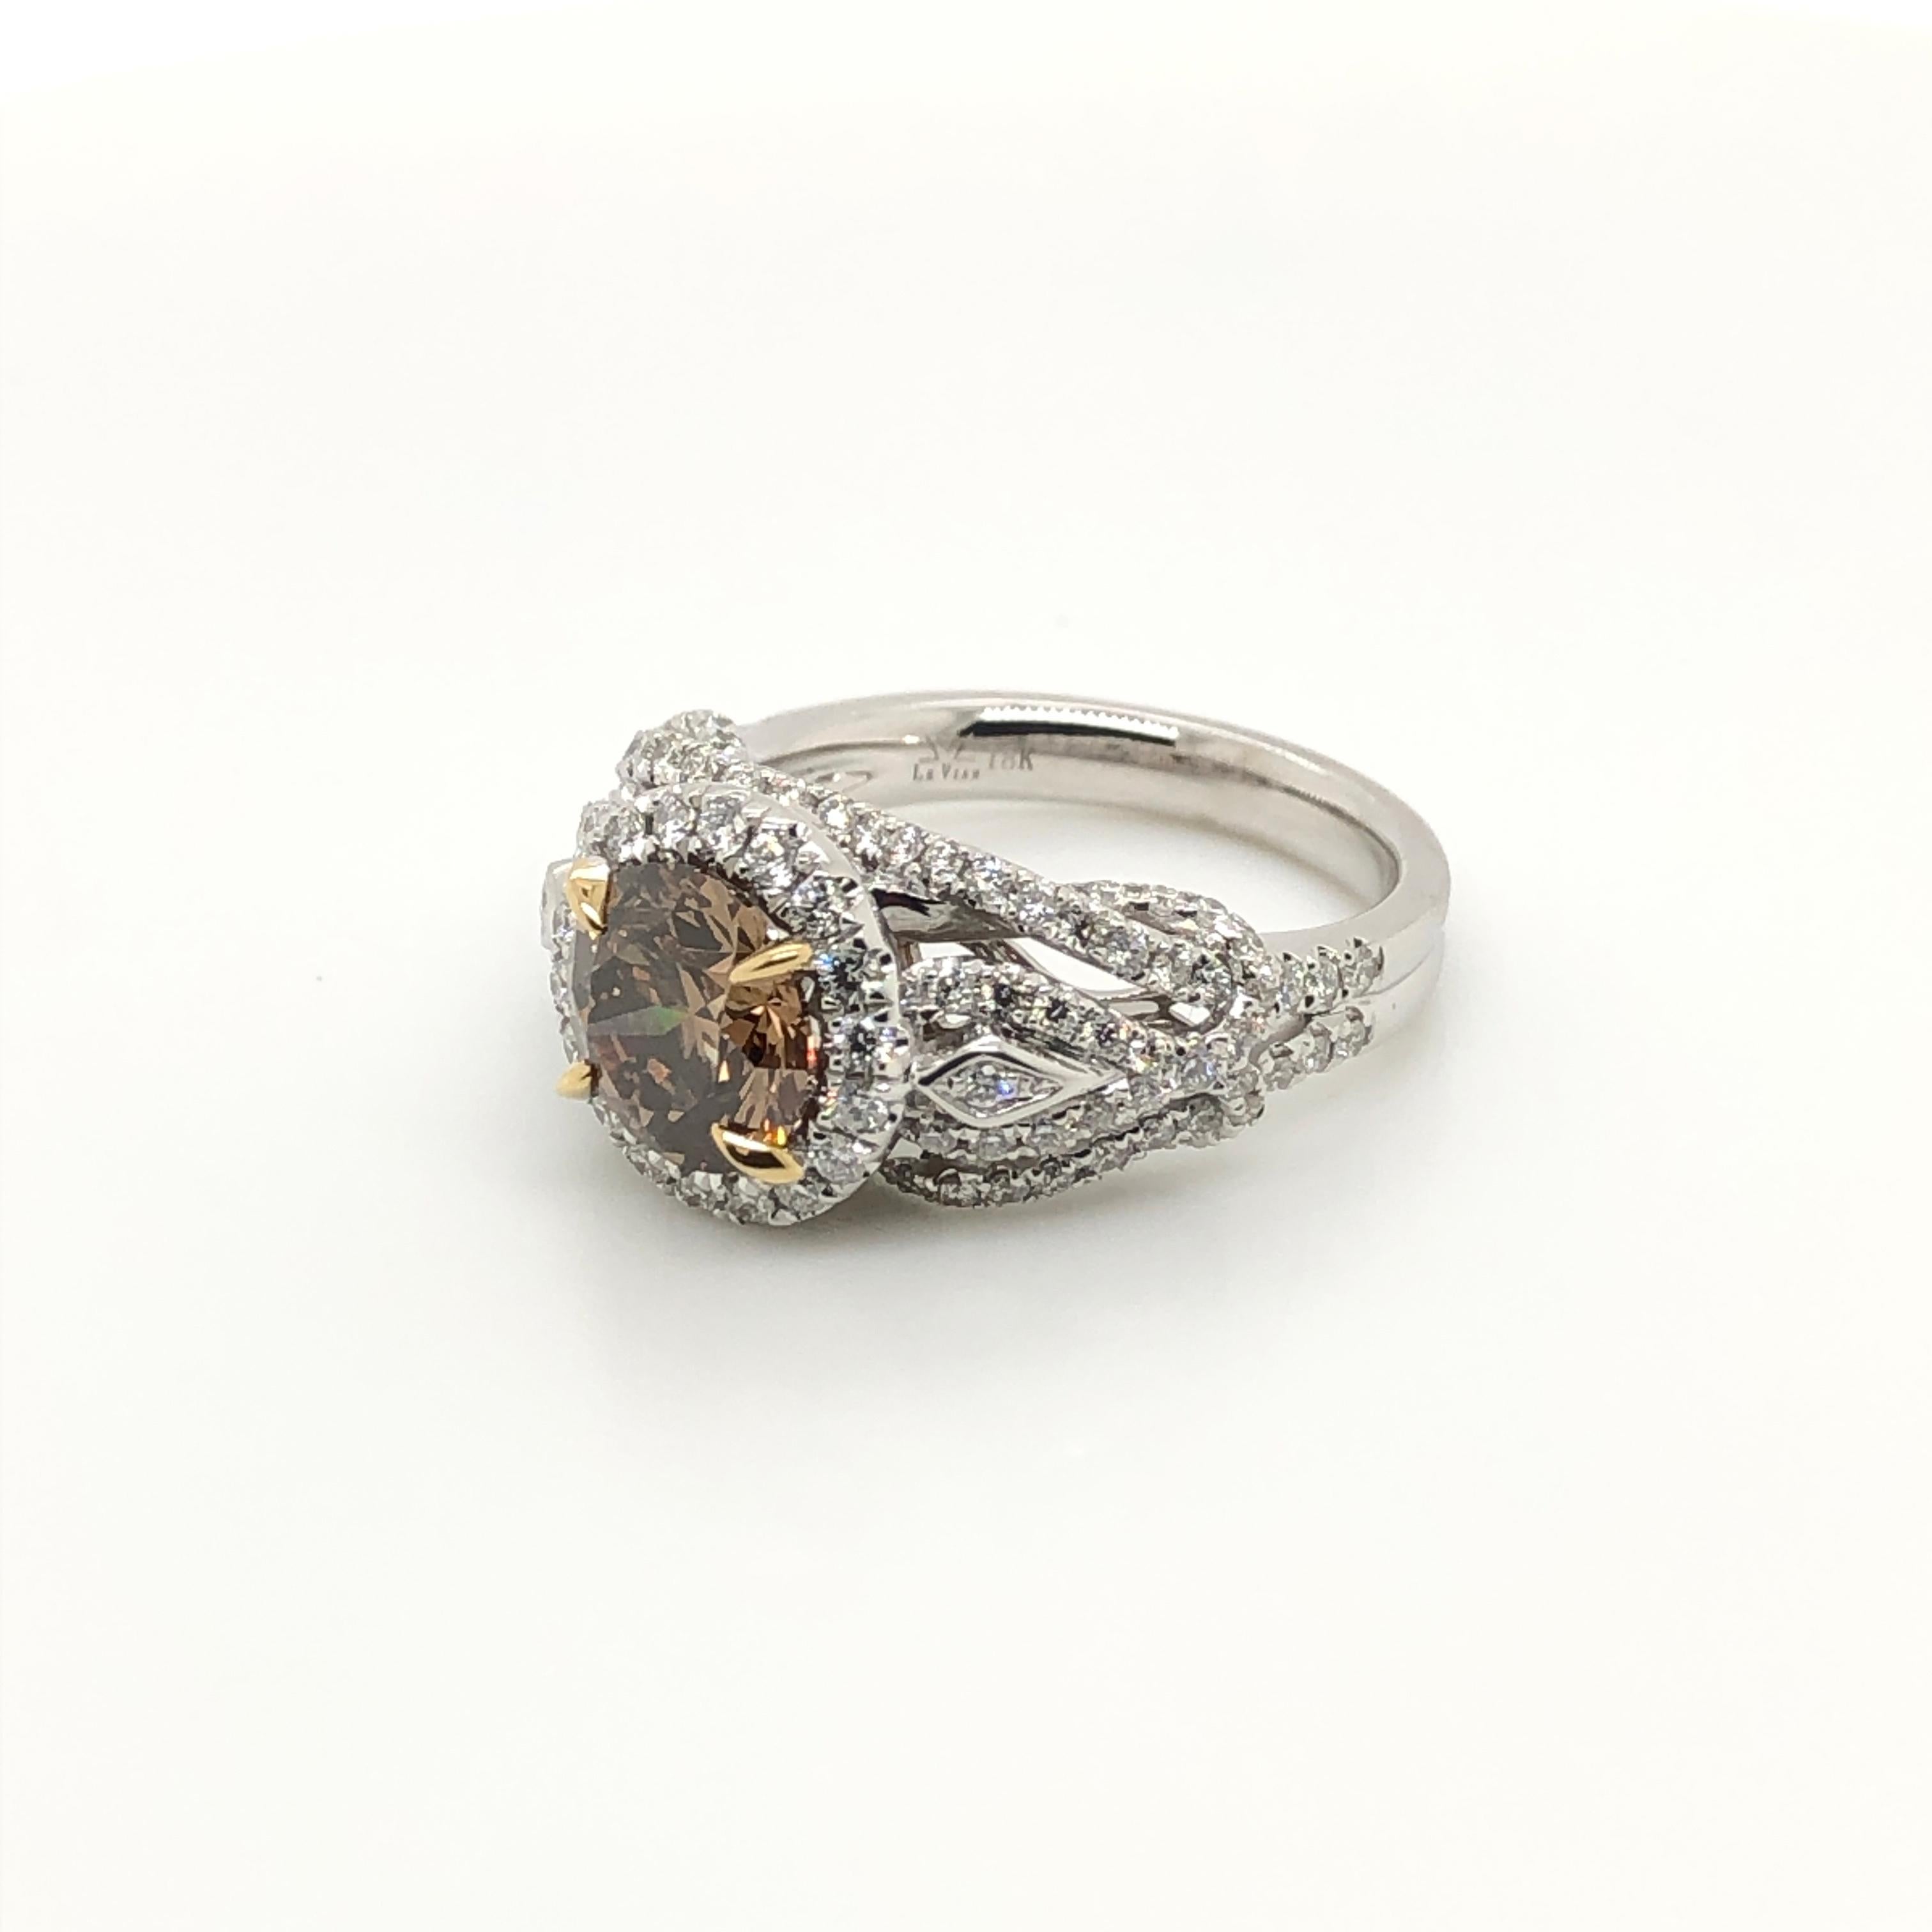 Sweetly  sophisticated, this stunning high profile 18k two tone gold engagement ring from Le Vian Couture features a 2-carat Chocolate Diamond nestled within a halo of Vanilla Diamonds, with exquisite sparkling diamond details revealed from every